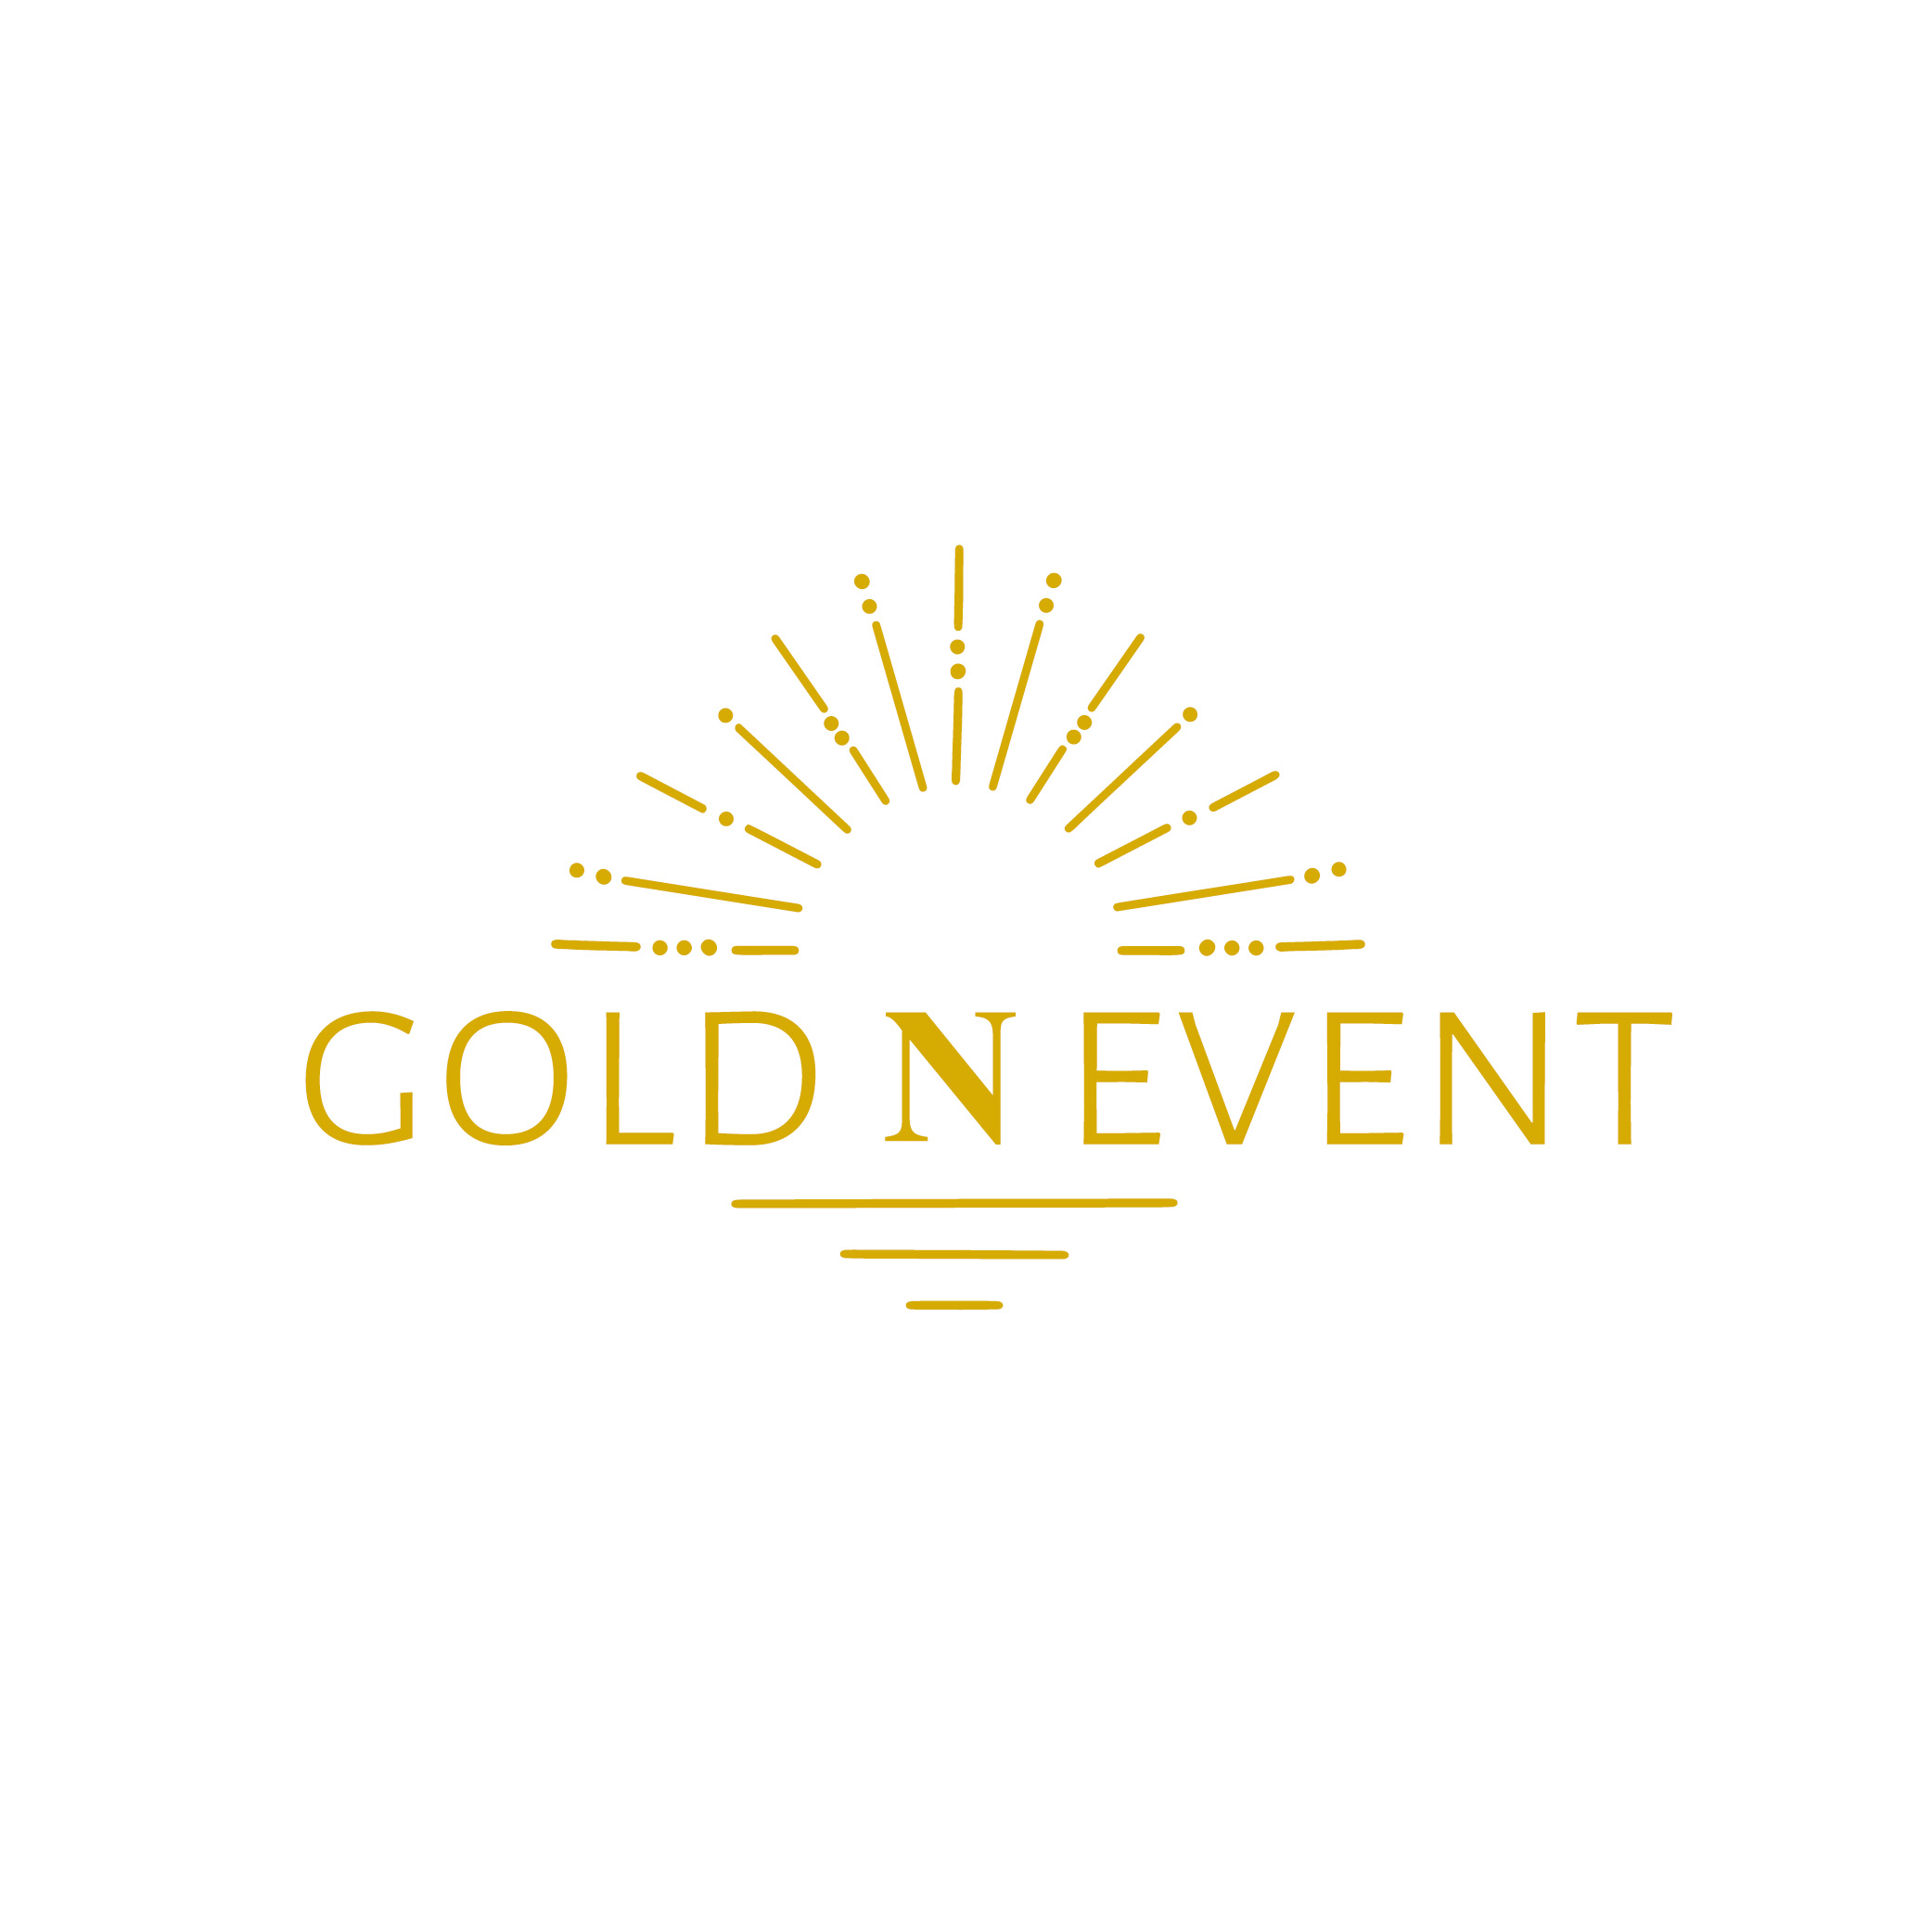 GOLD’N EVENT